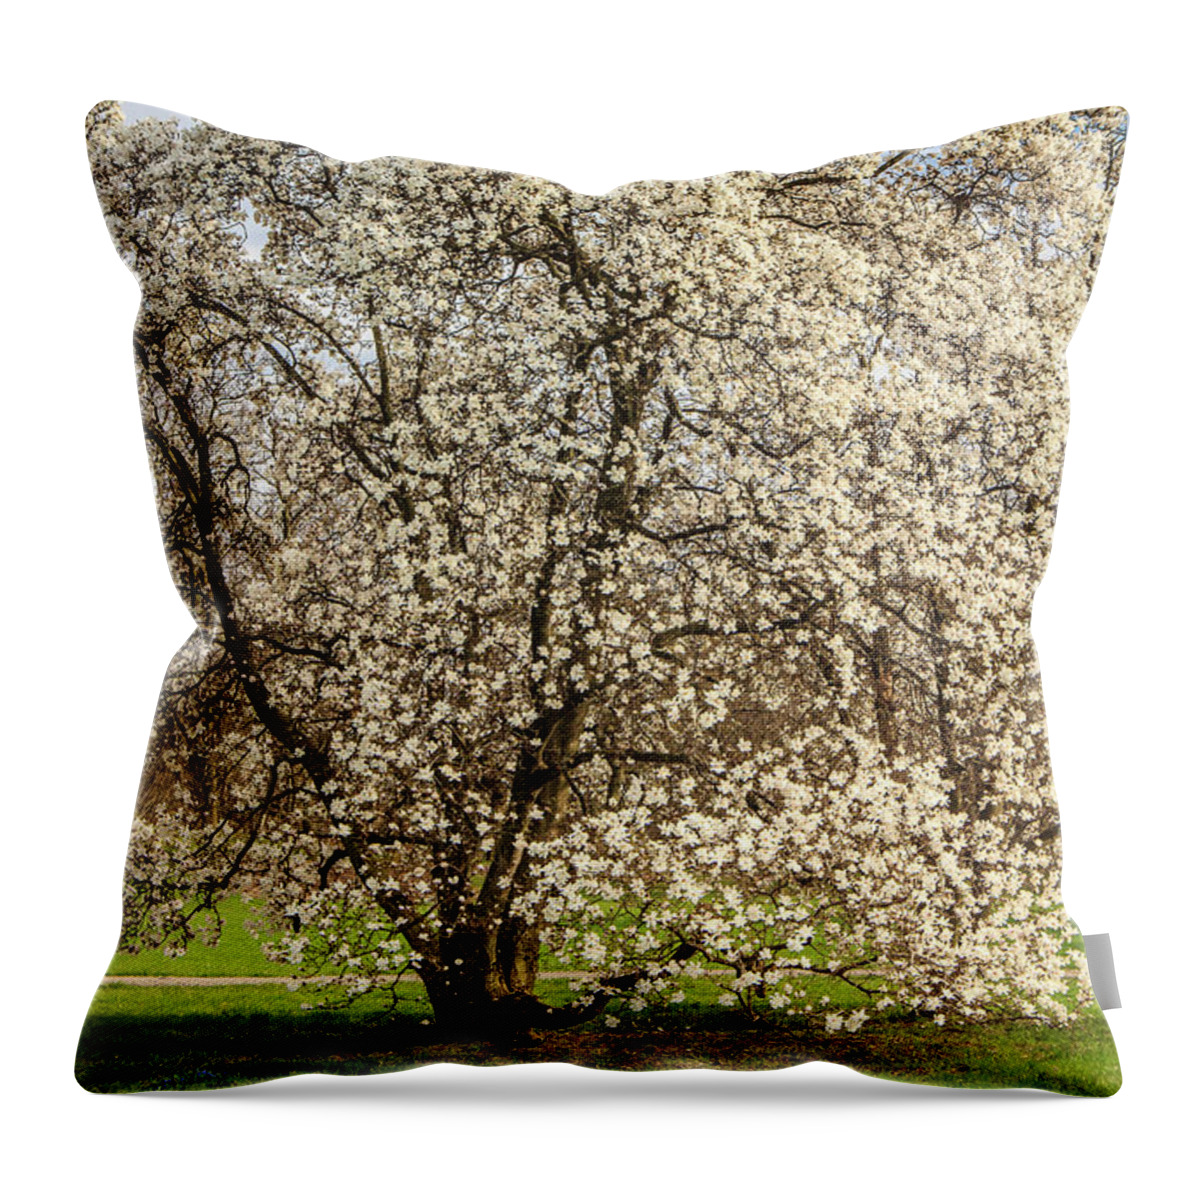 Full Throw Pillow featuring the photograph White Magnolia Tree in Full Bloom by Joni Eskridge